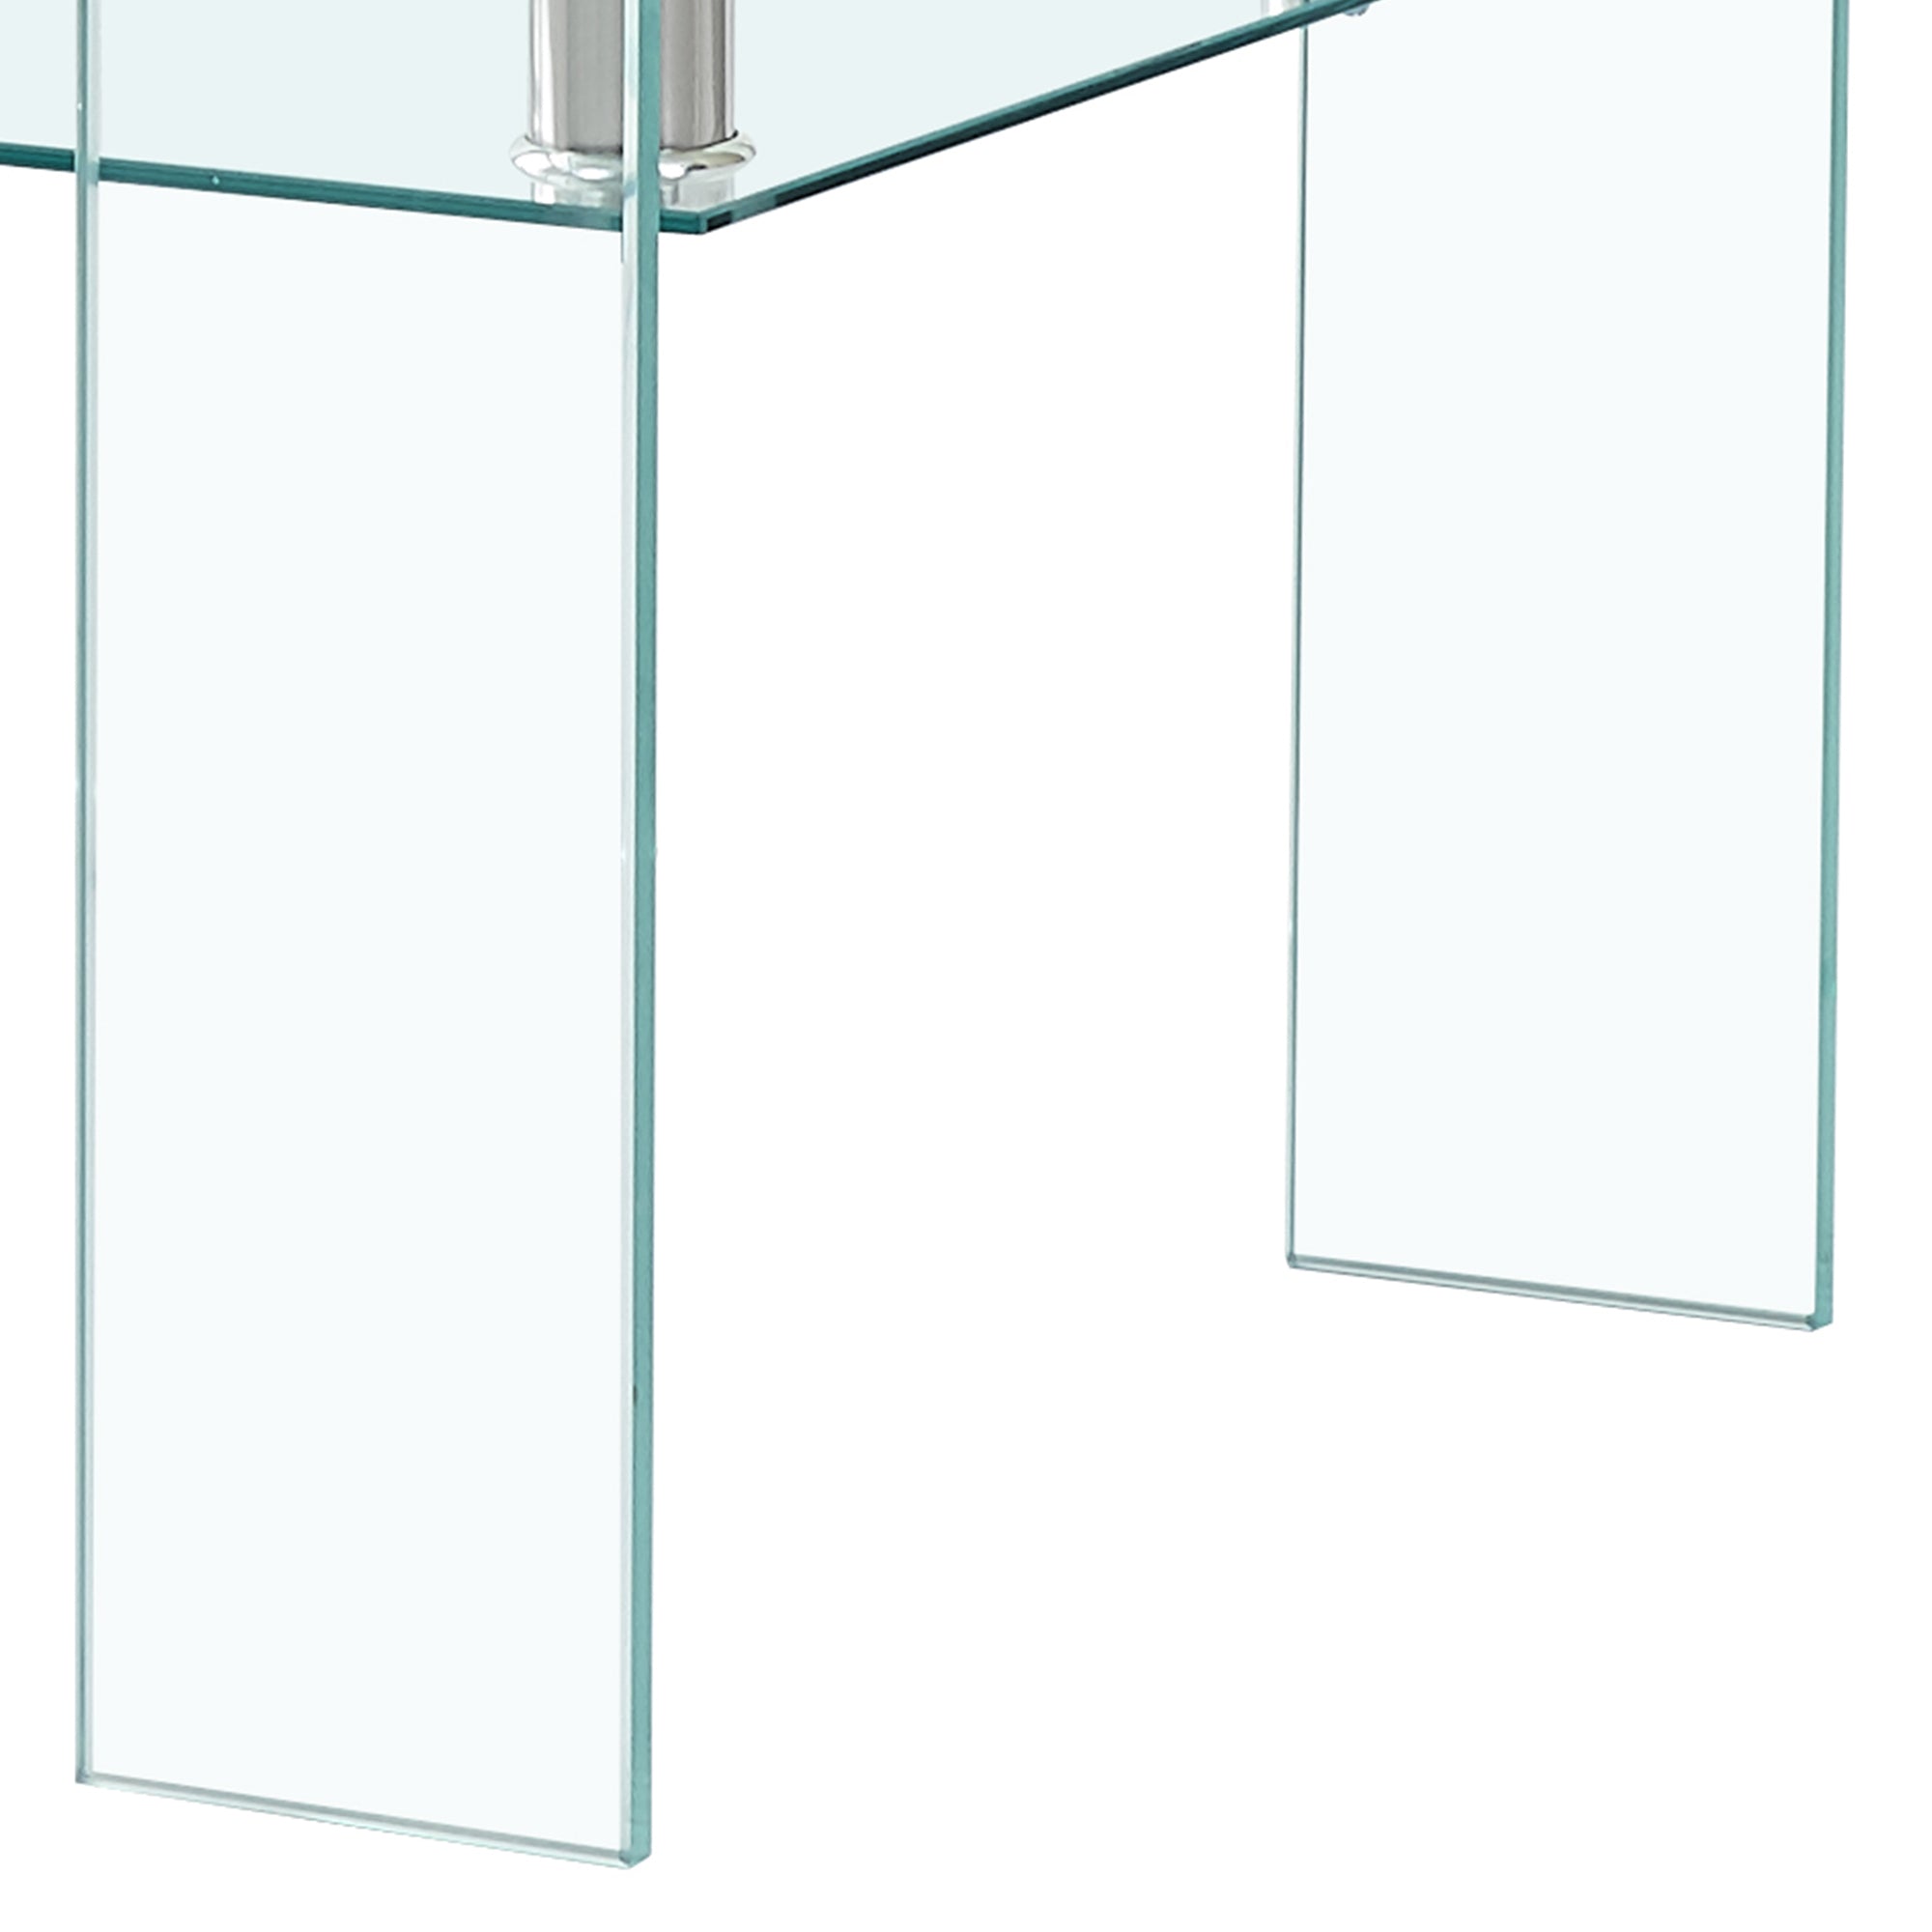 Modern Clear Glass Coffee Table- Tempered Glass